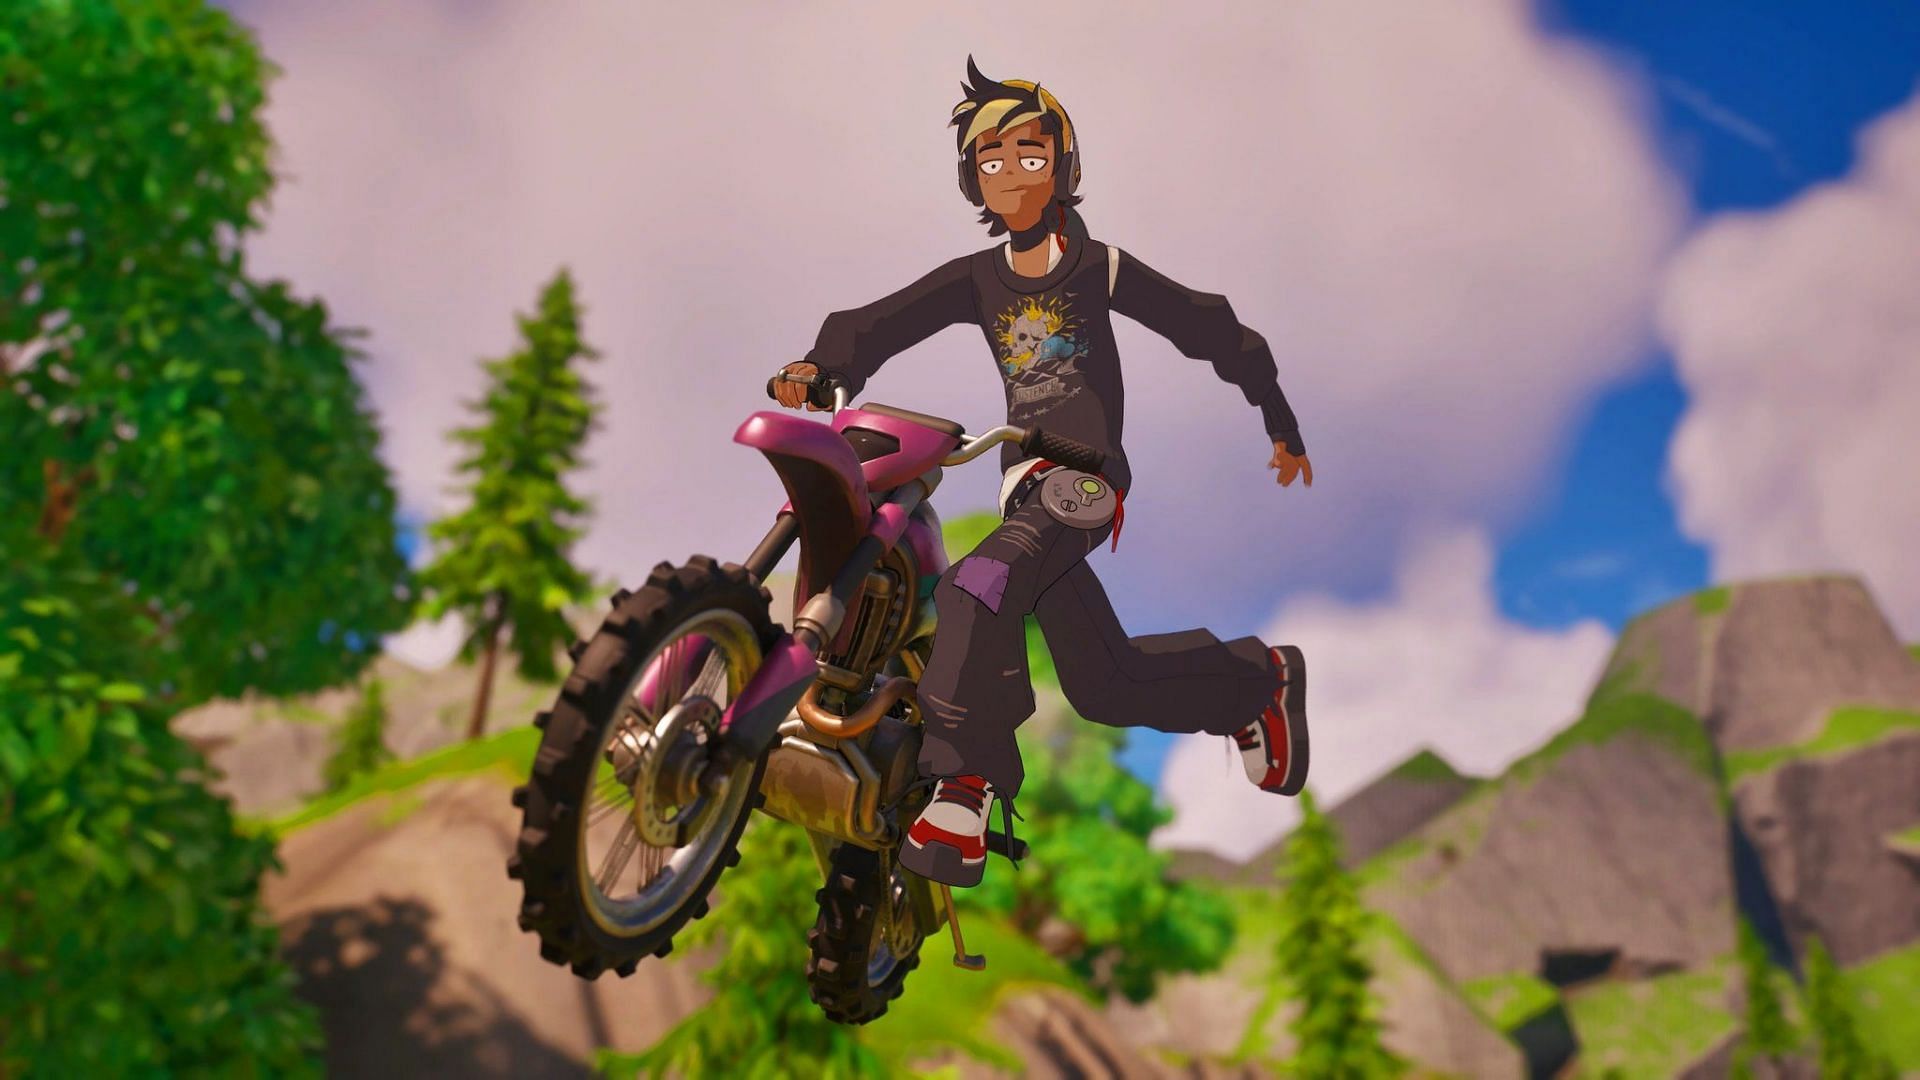 Remi is getting some air-time while waiting for the Fortnite update v25.11 downtime to end (Image via Twitter/orticles)